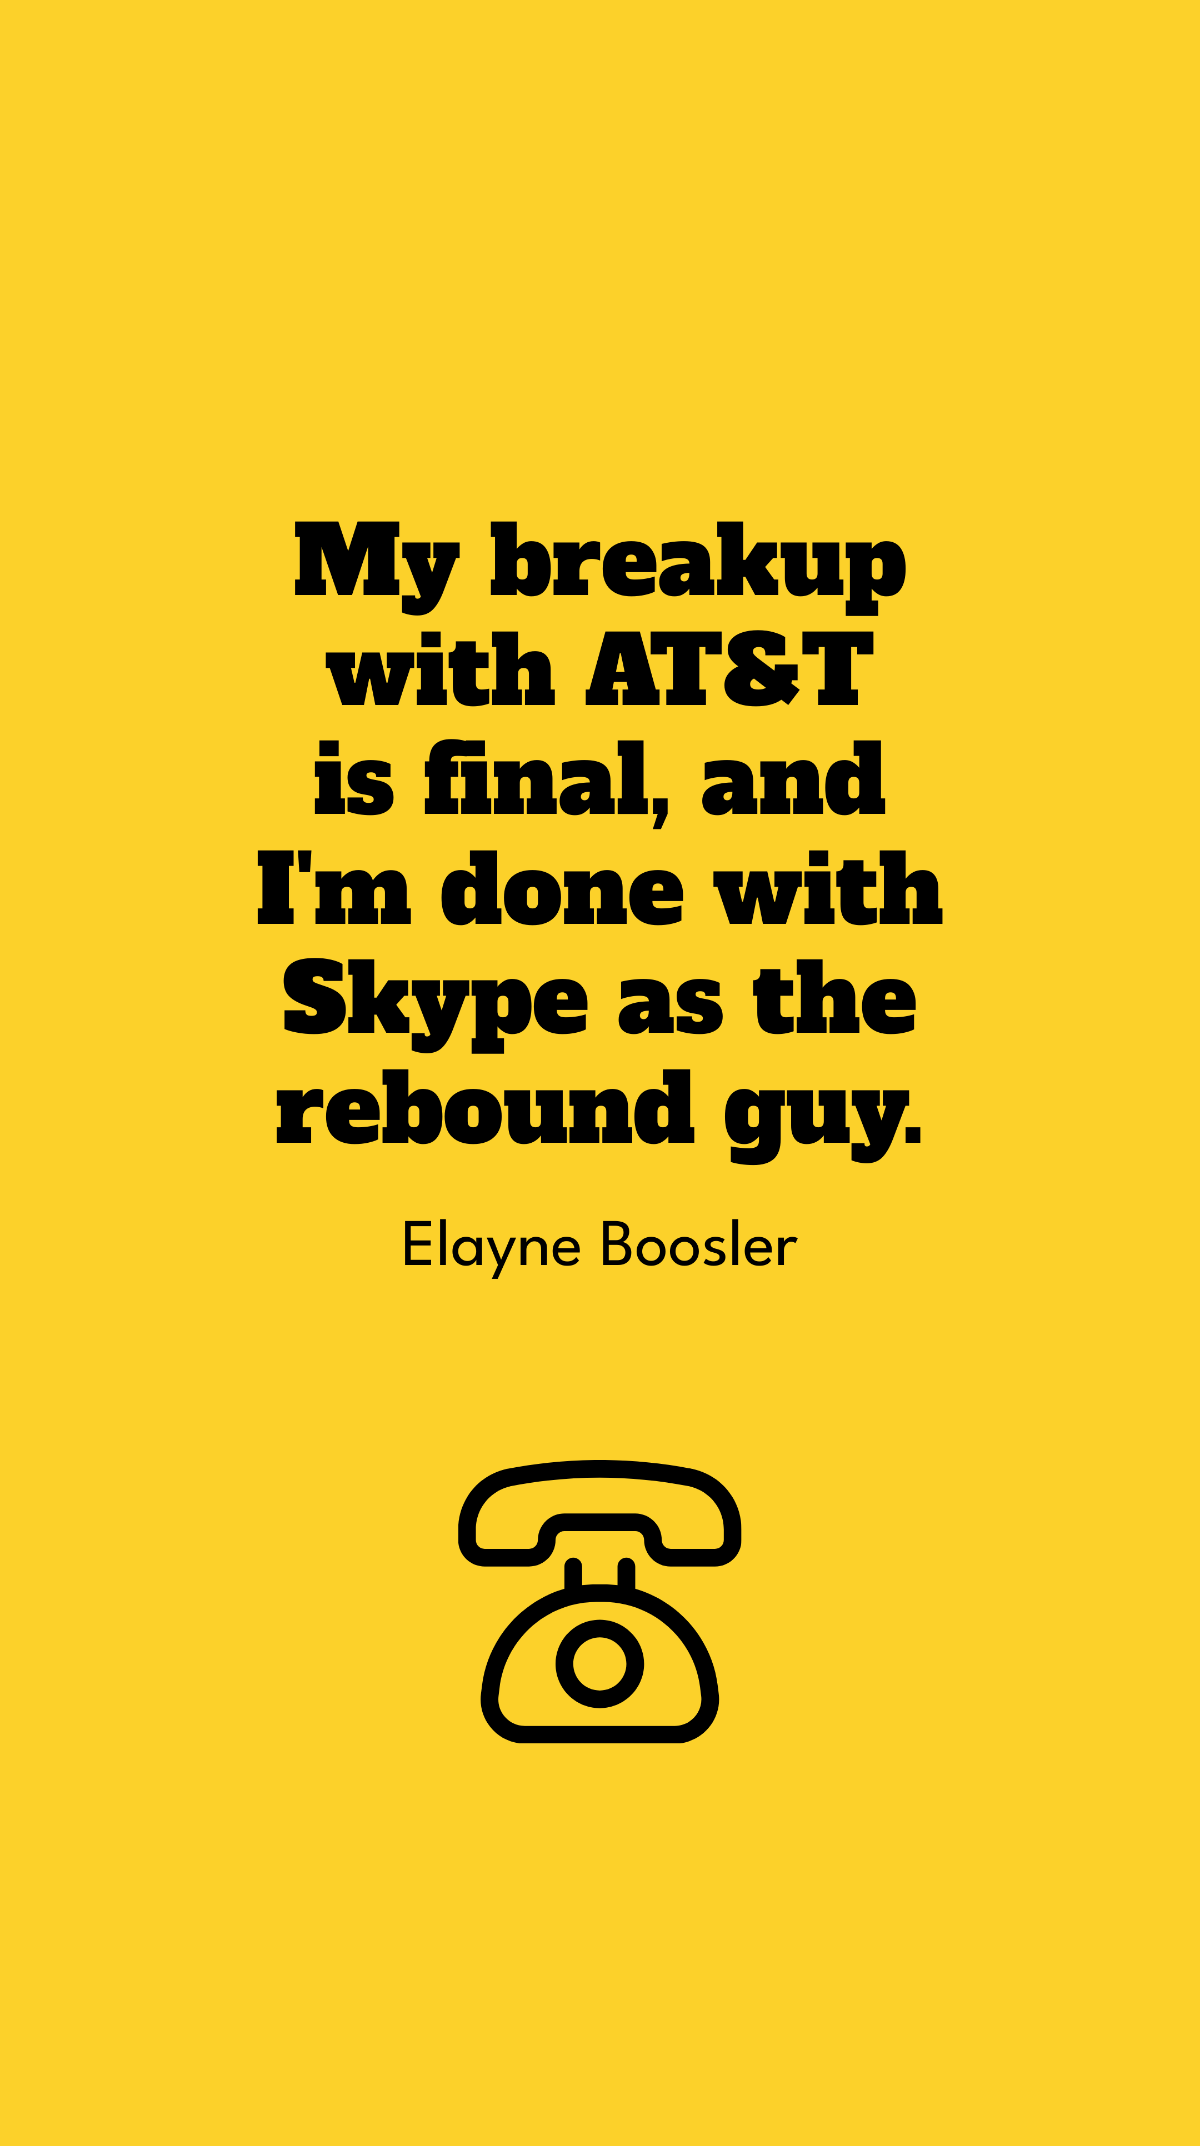 Elayne Boosler - My breakup with AT&T is final, and I'm done with Skype as the rebound guy.